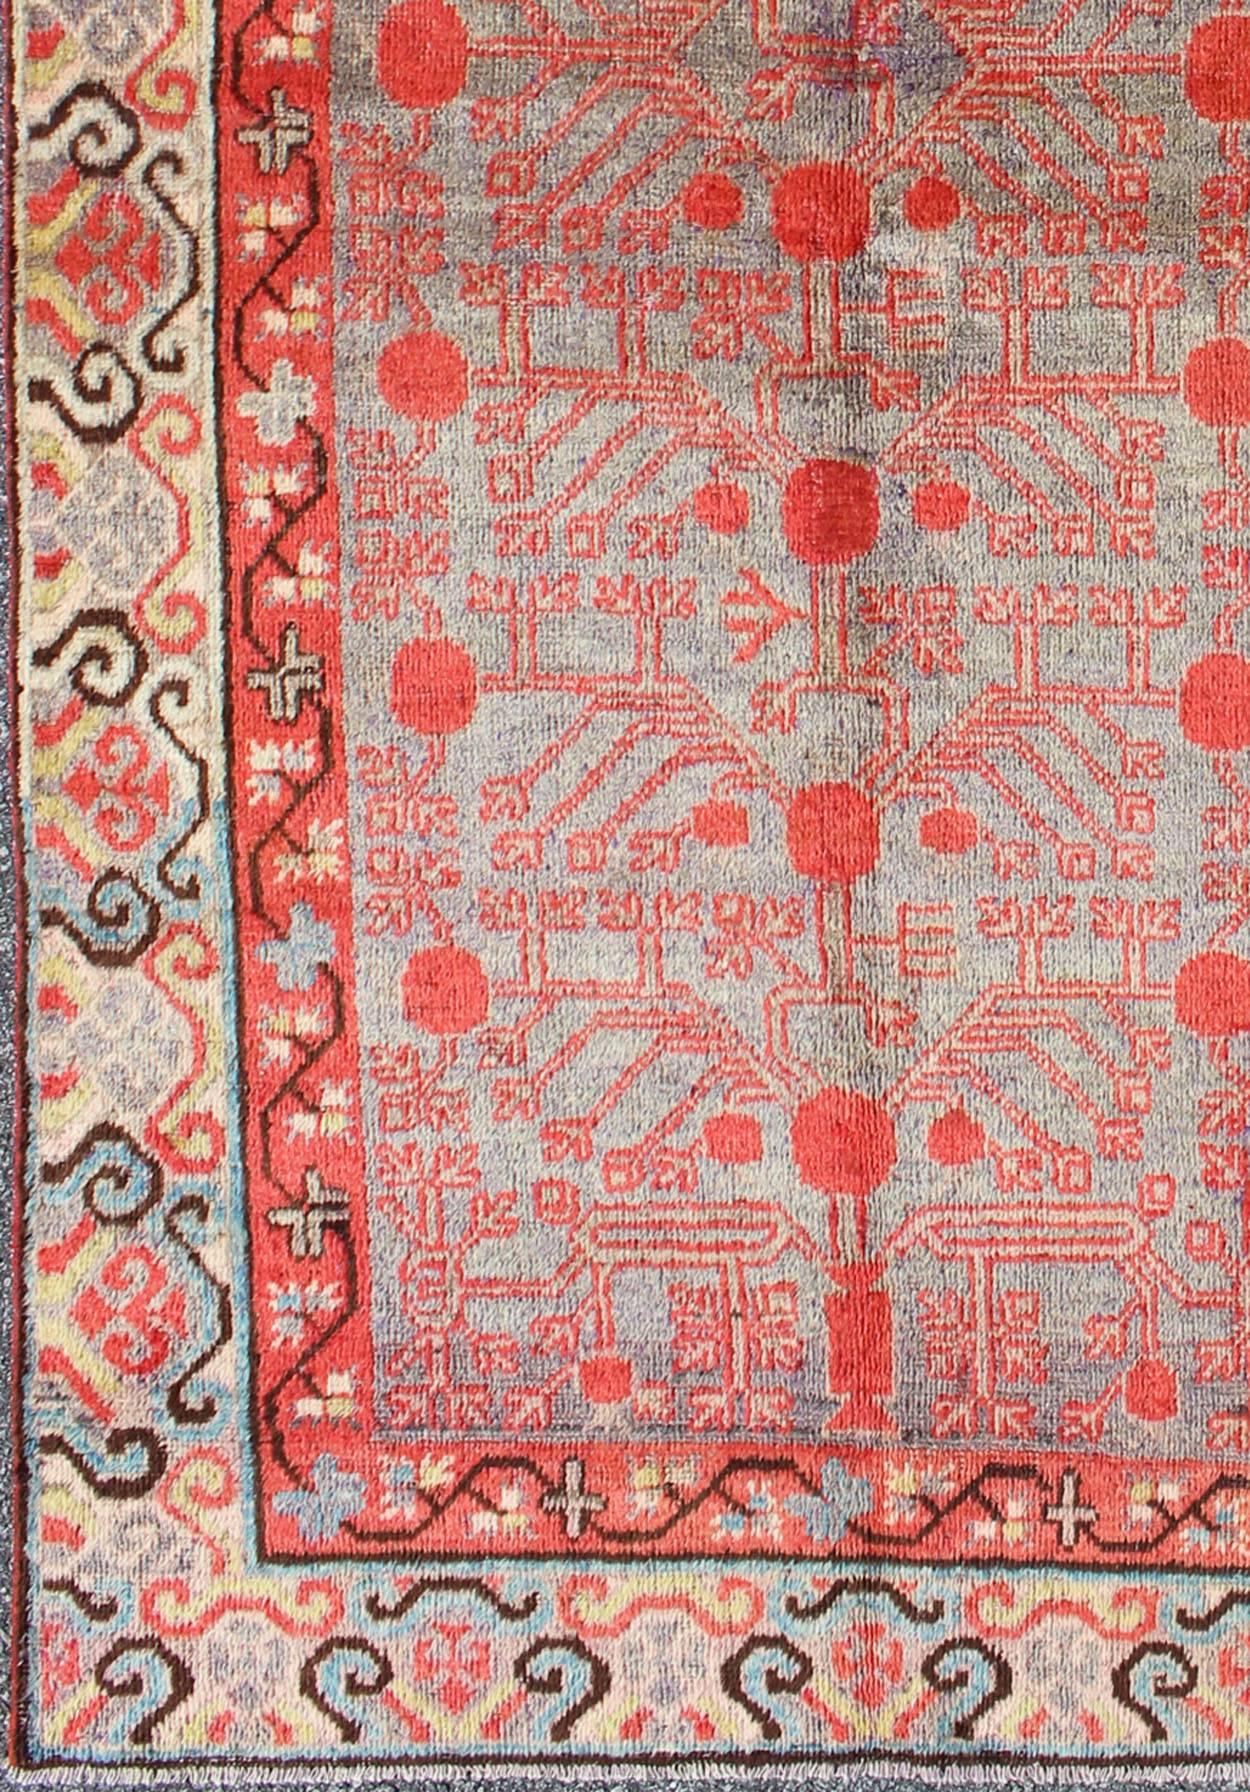 Measures: 3'10'' x 8'1''.
This unique antique Khotan rug is a spectacular testament to the complexity of Turkestan design. The red and light blue of the central field plays host to a stunning sub-geometric pattern design enclosed within a double